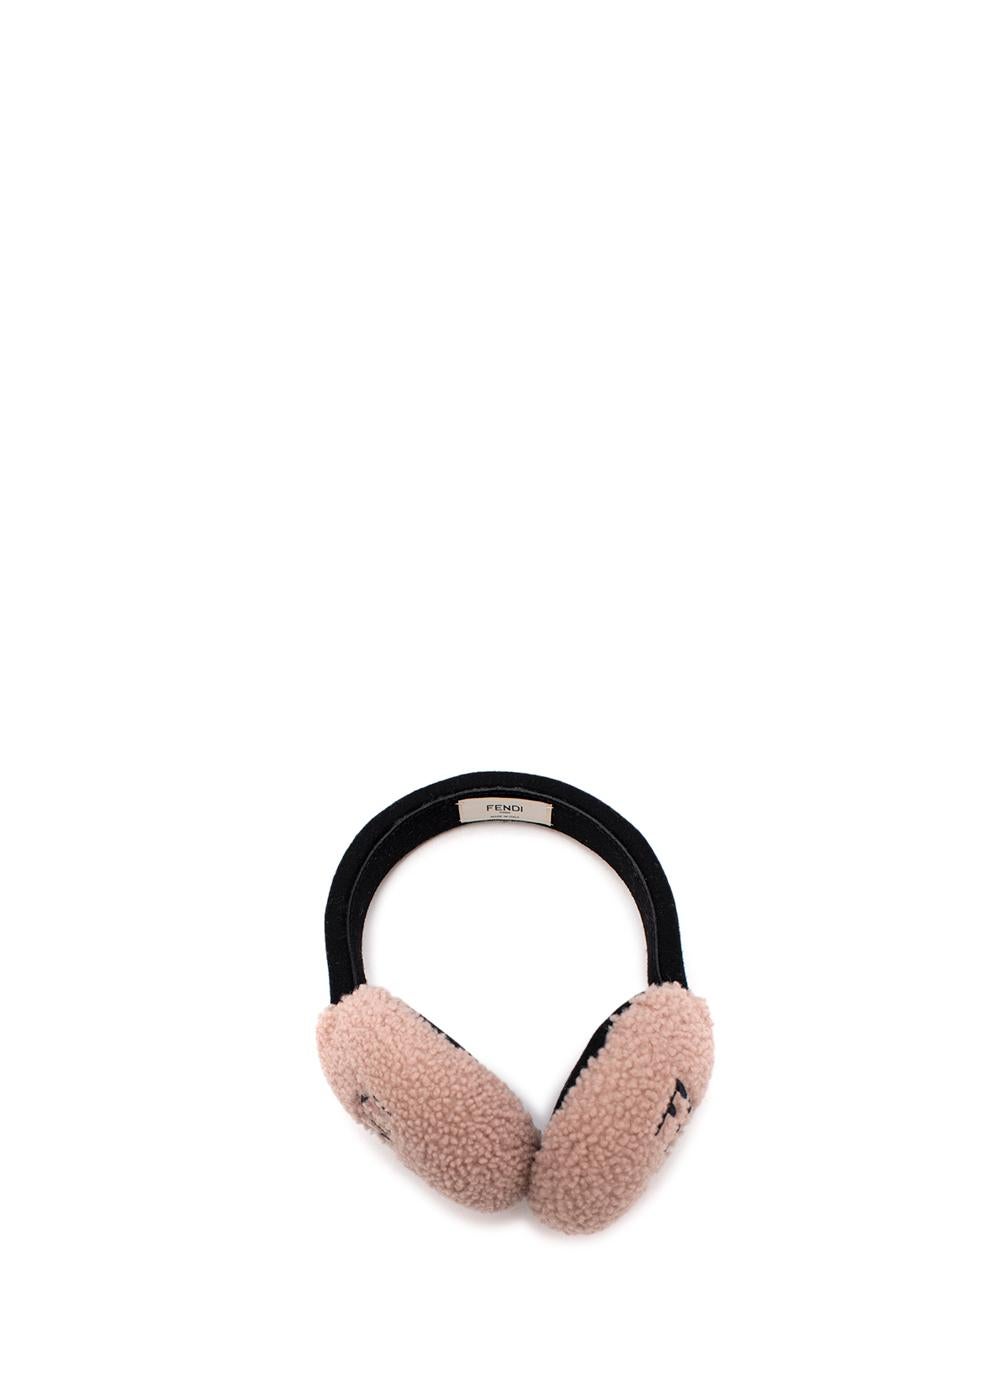 Fendi Blush Shearling Logo Embroidered Ear Muffs In New Condition For Sale In London, GB